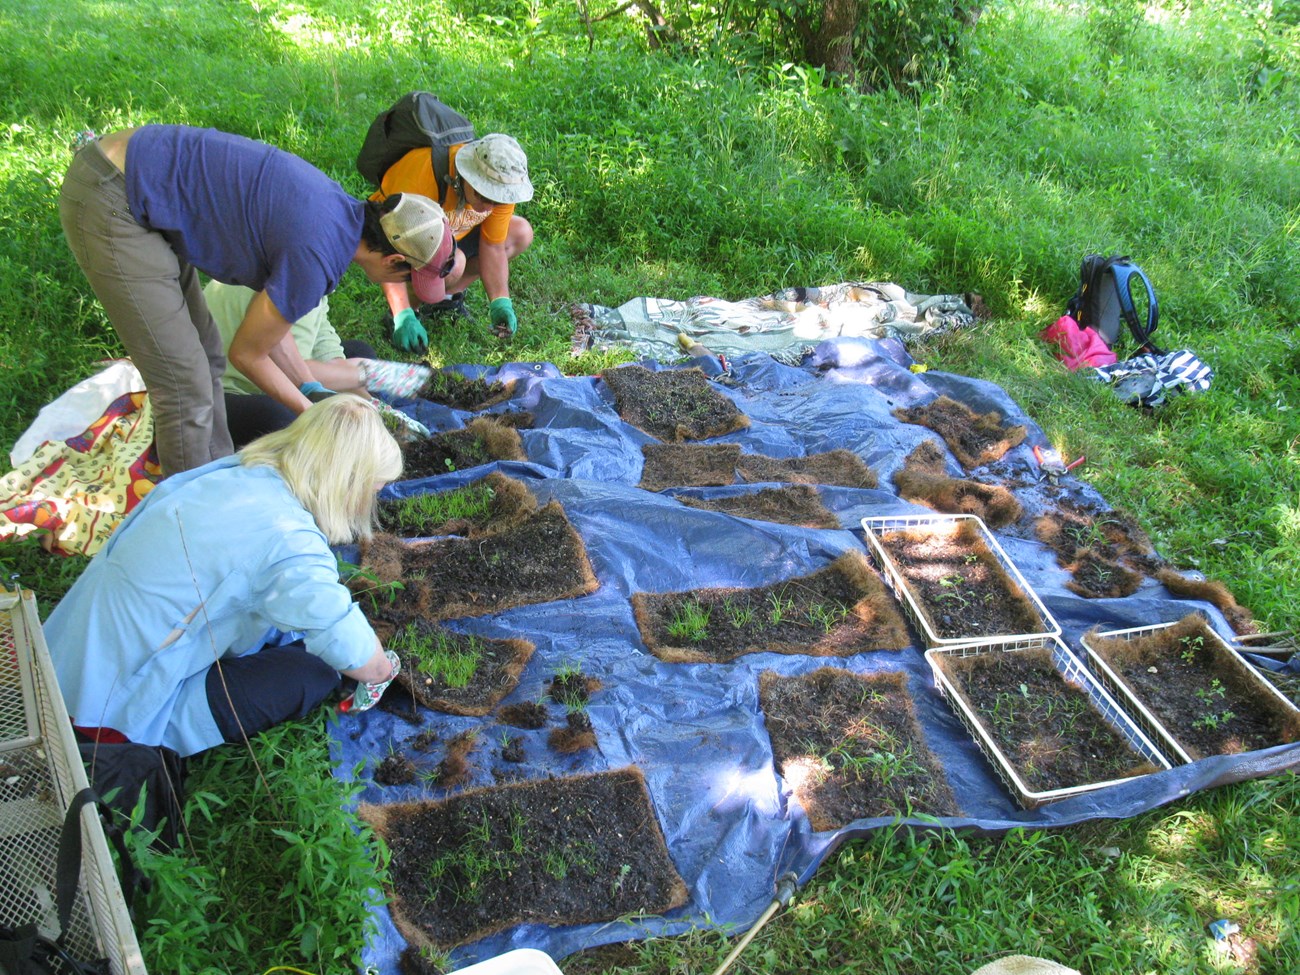 three people kneel by beds of plant starters on a blue tarp in a grassy meadow